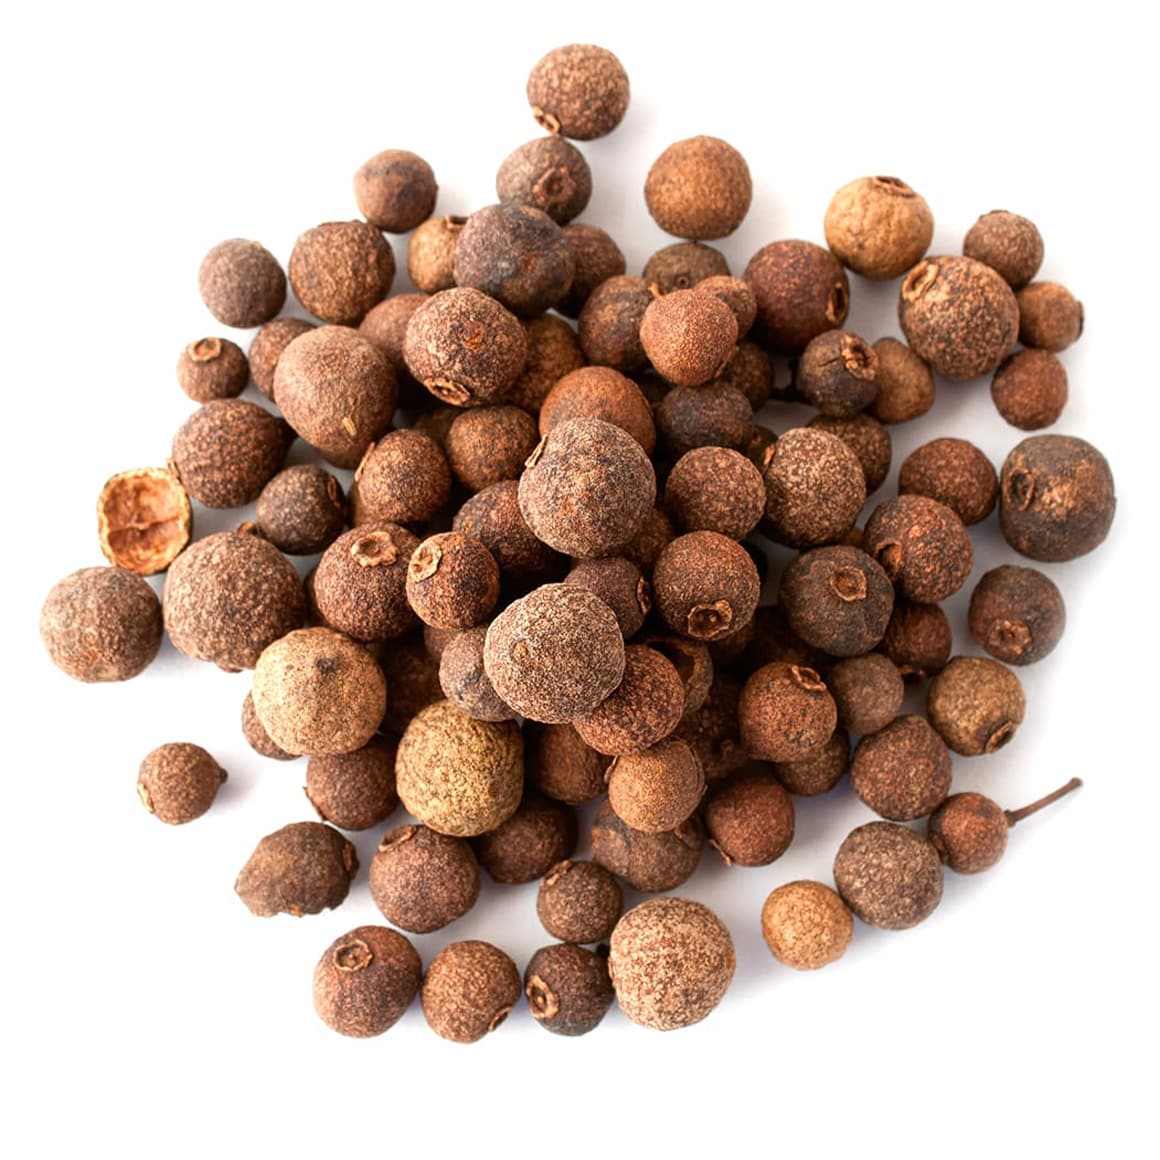 All About Allspice